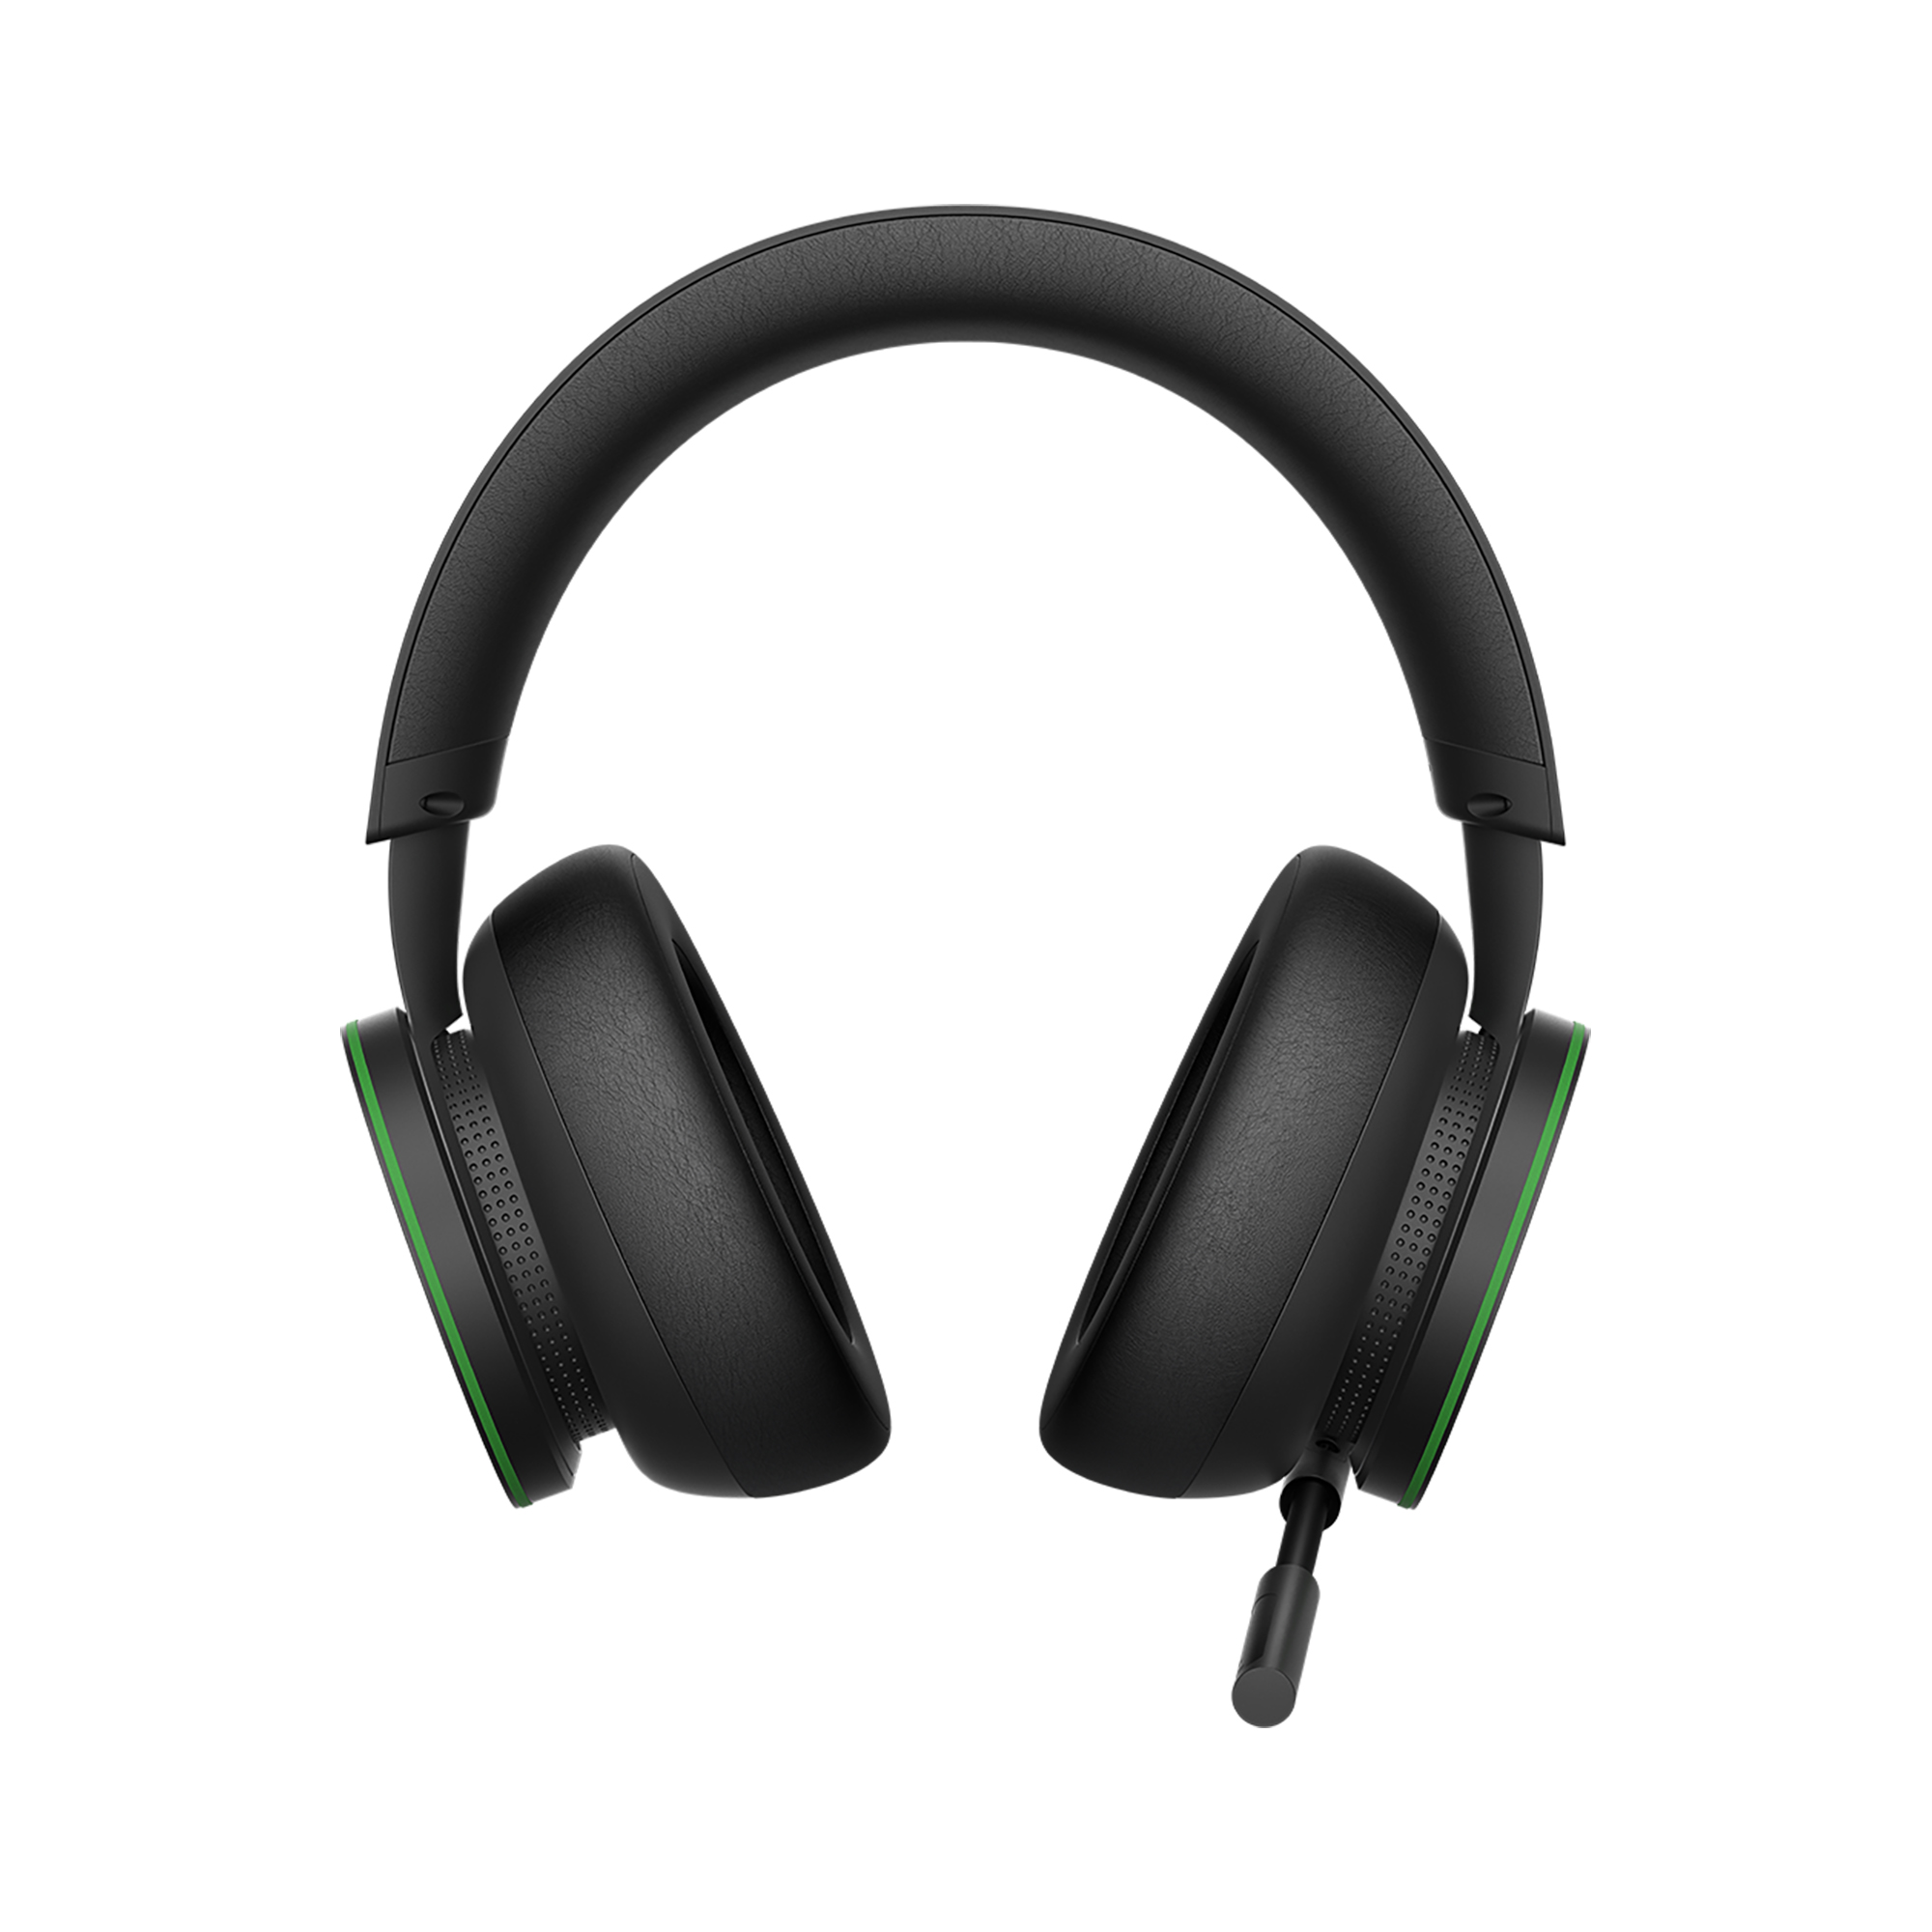 Microsoft Xbox Wireless Headset for Xbox Series X/S, Xbox One, and Windows 10 Devices - image 4 of 10